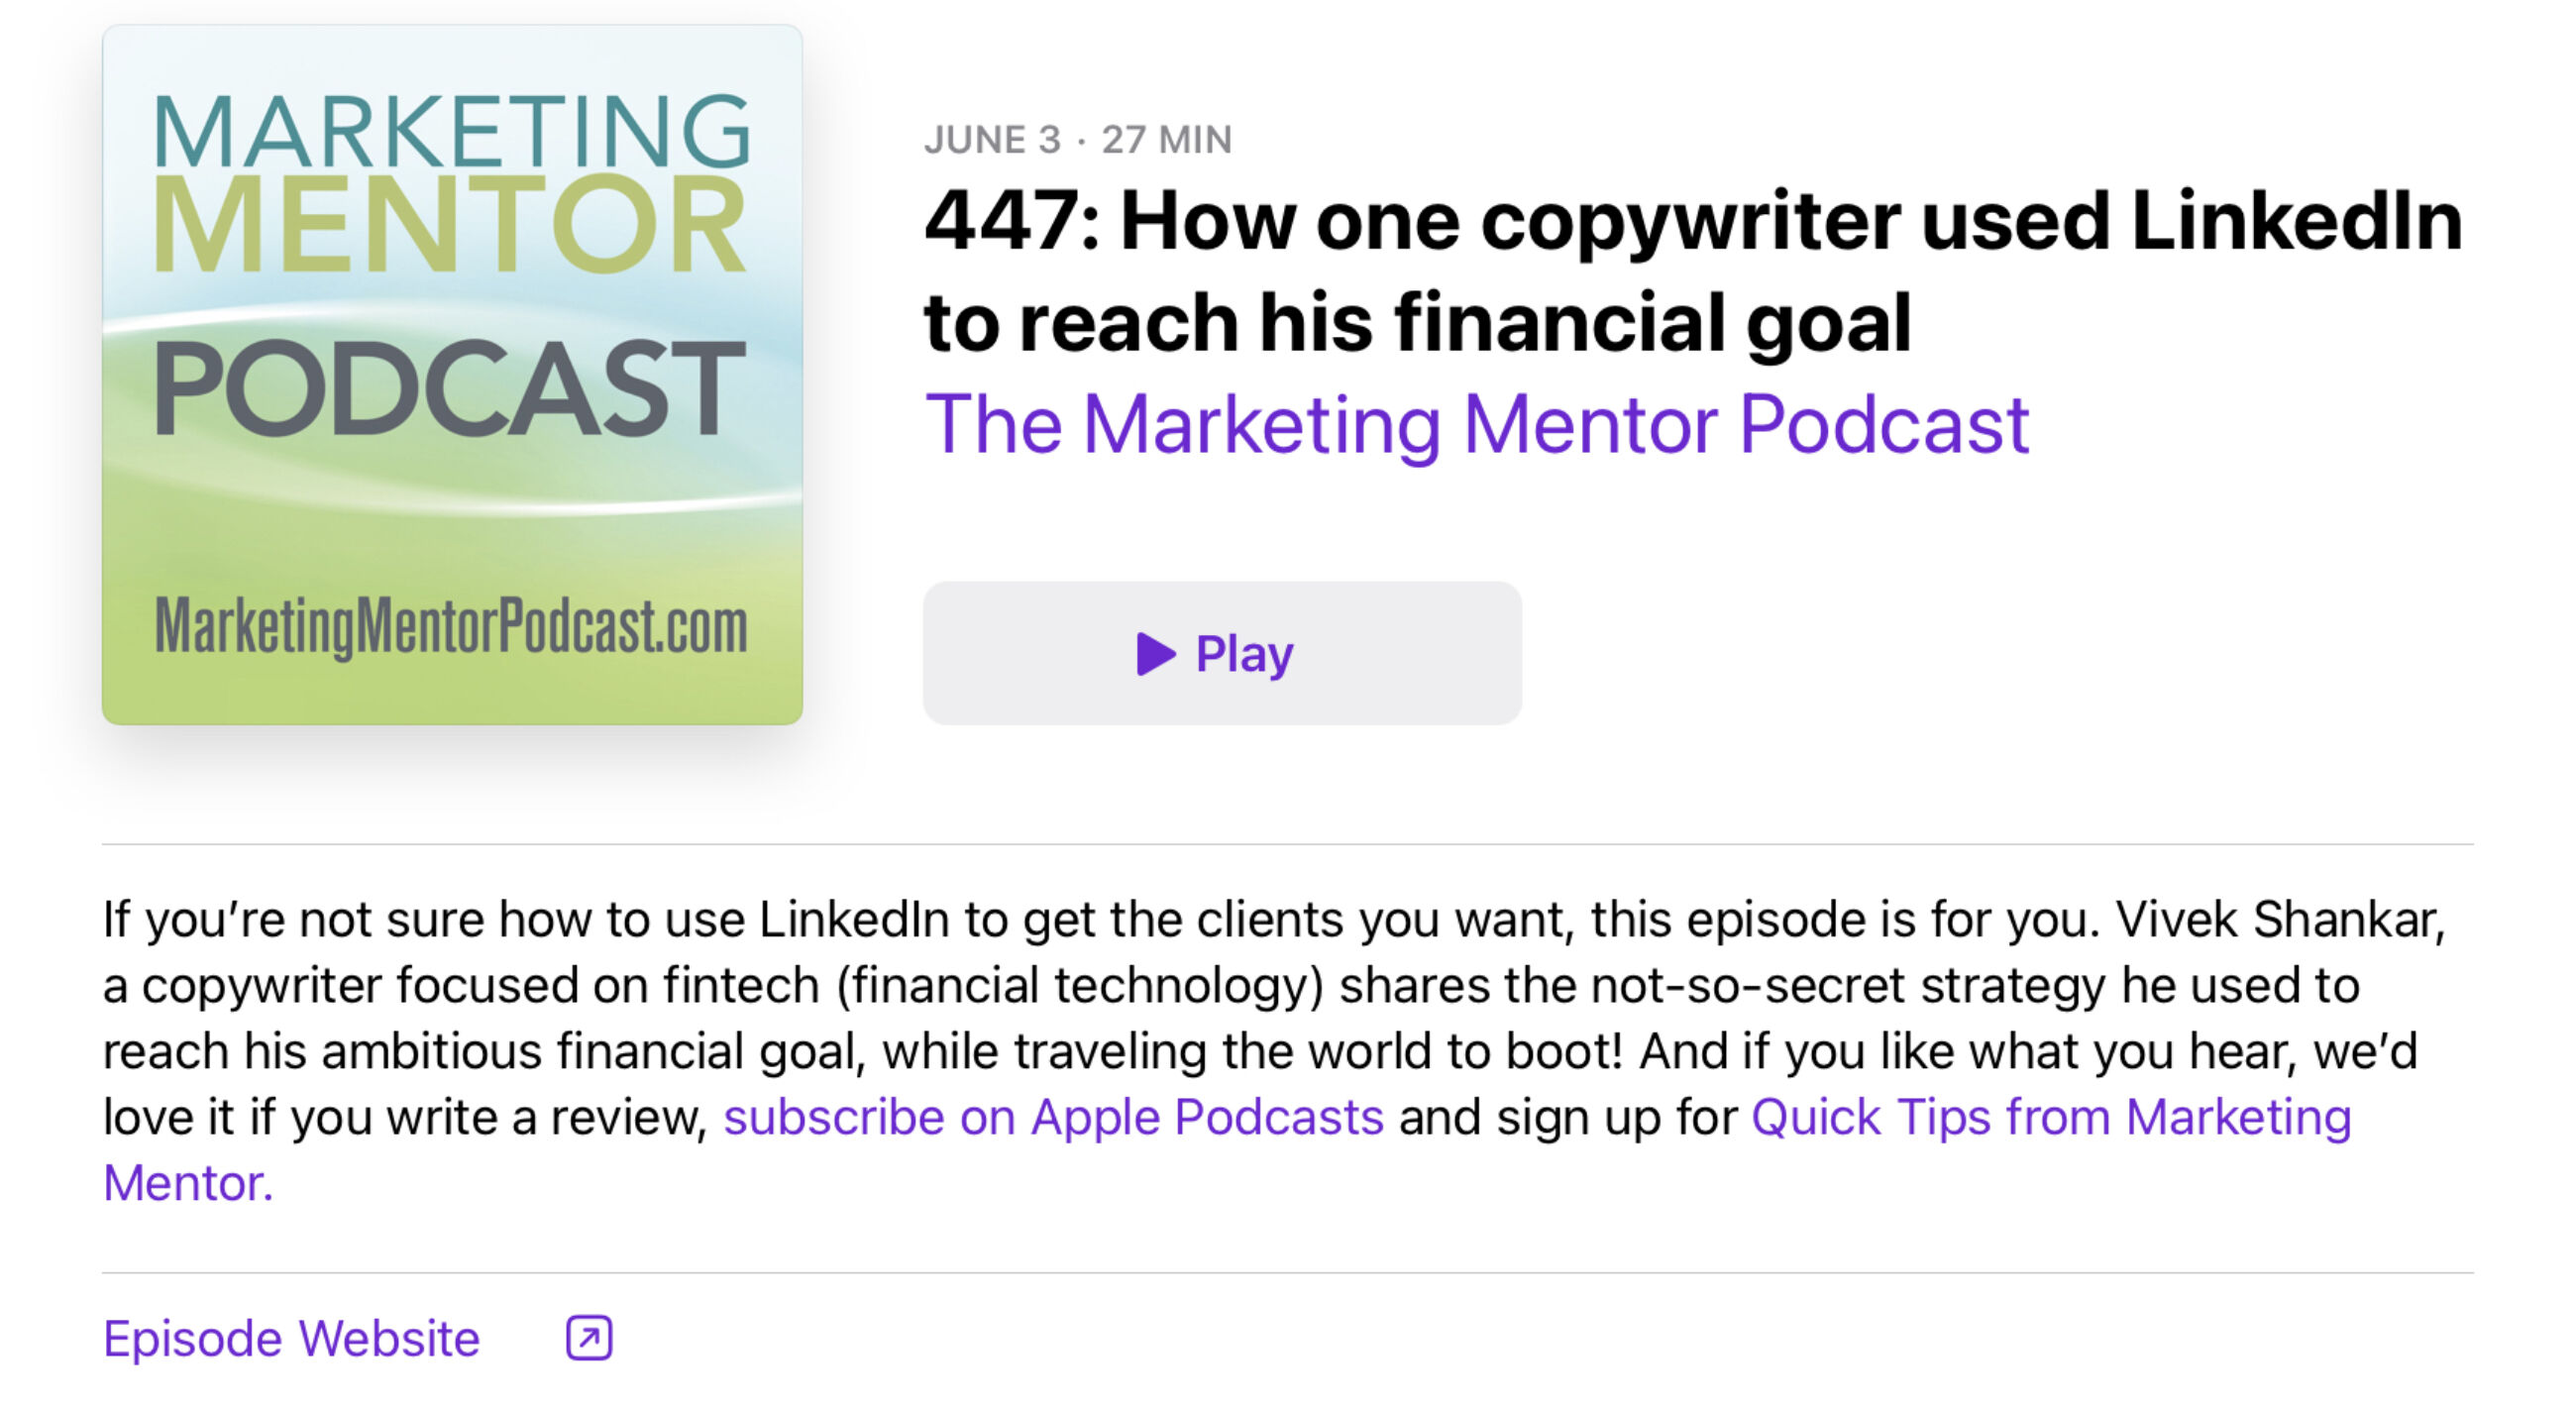 Marketing Mentor podcast profile that includes links in description to subscribe to the podcast and email list